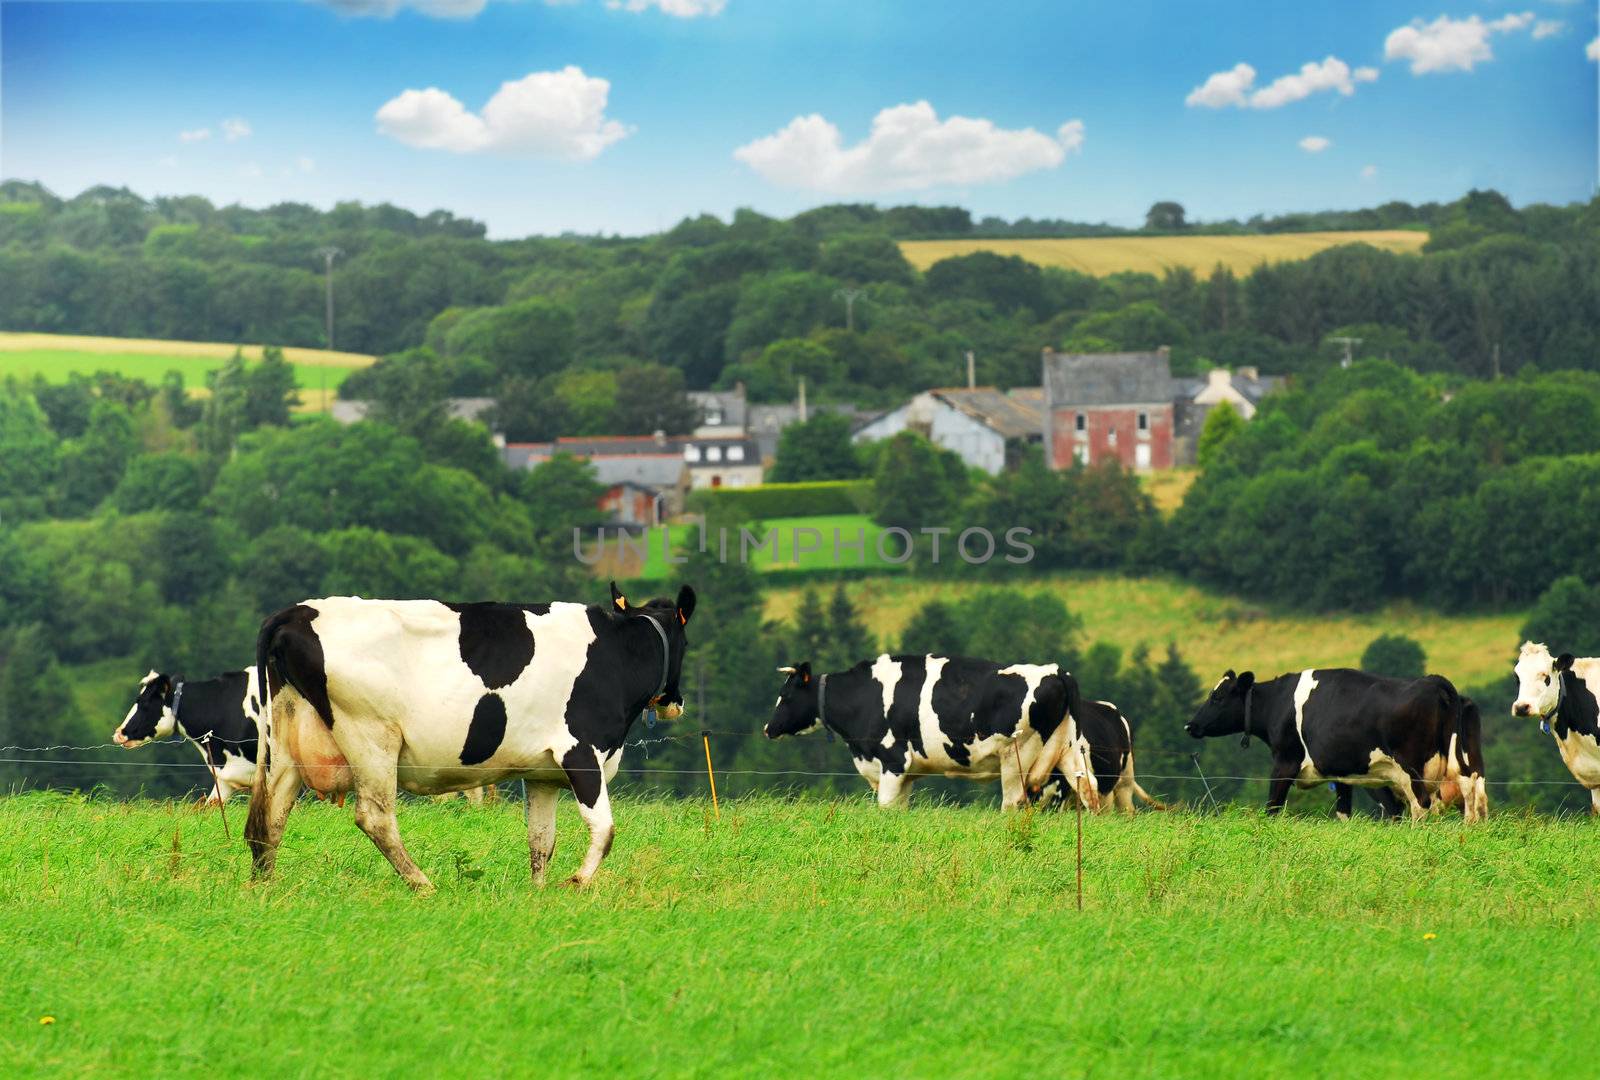 Cows grazing in a green pasture in rural Brittany, France.